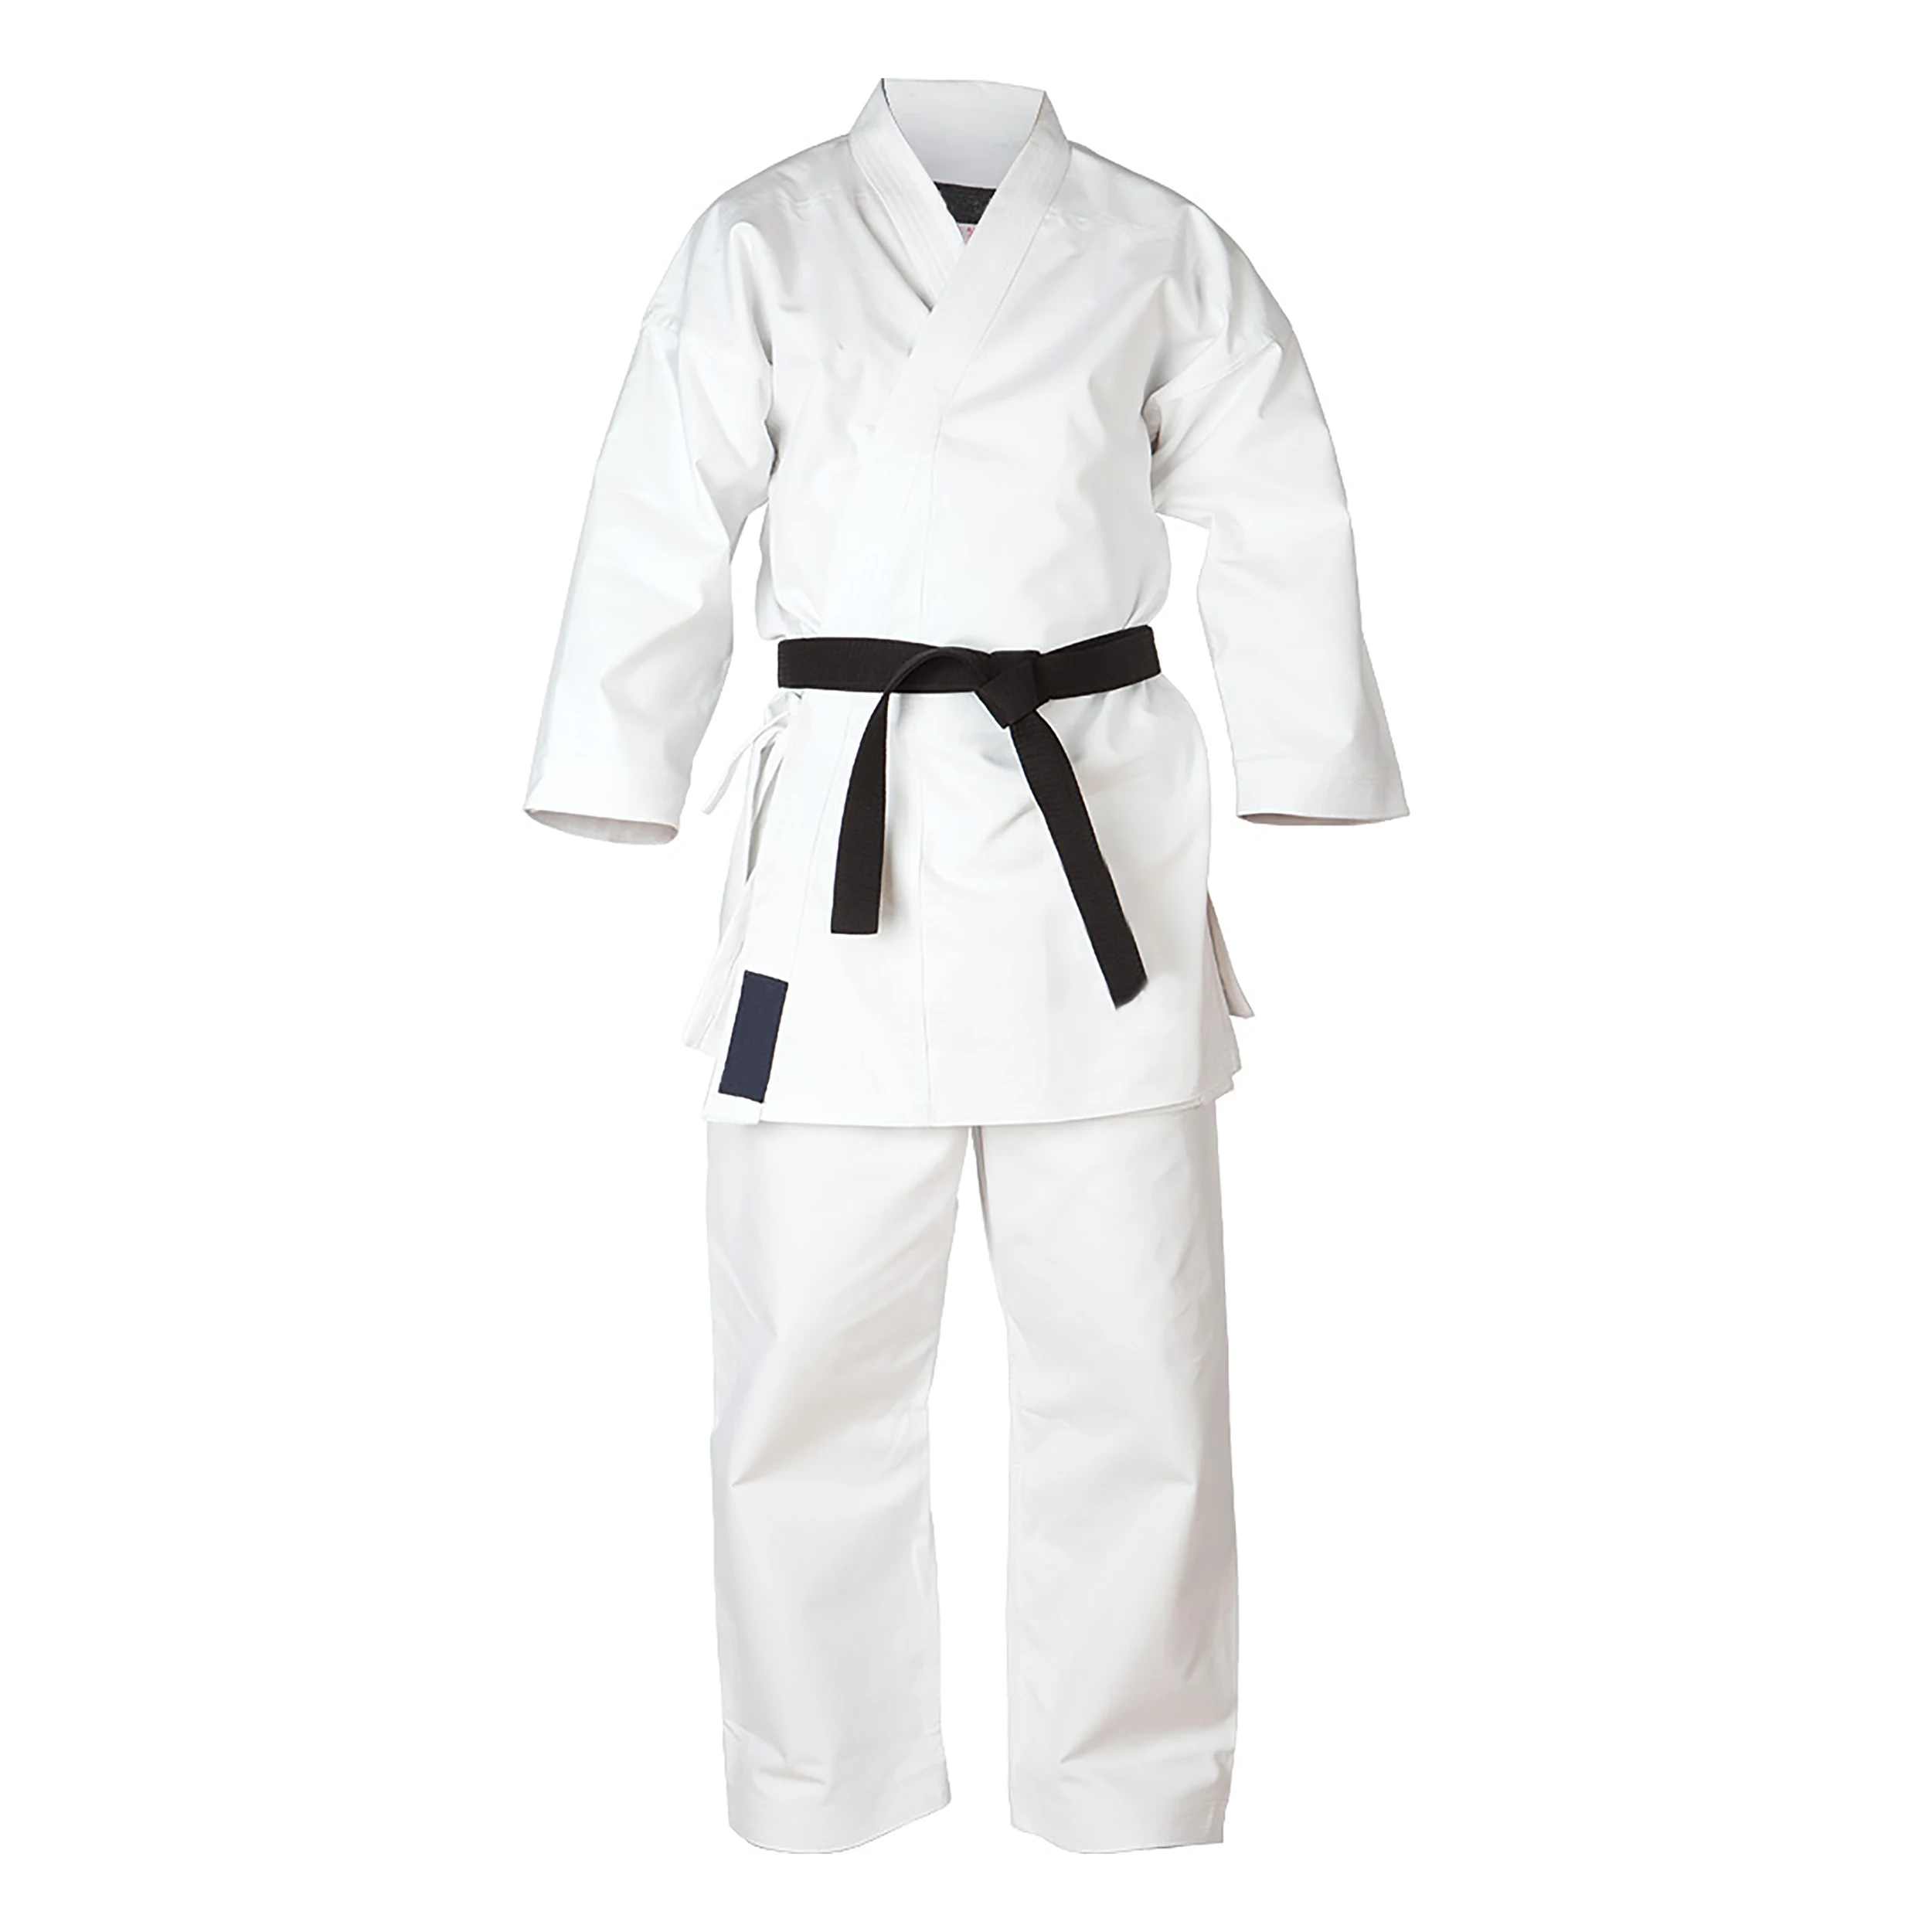 The Best Karate Uniforms Martial Arts Clothing,Karate Suits For Men - Buy Karate  Uniform,Martial Art Suit,Judo Karate Suit Product on 